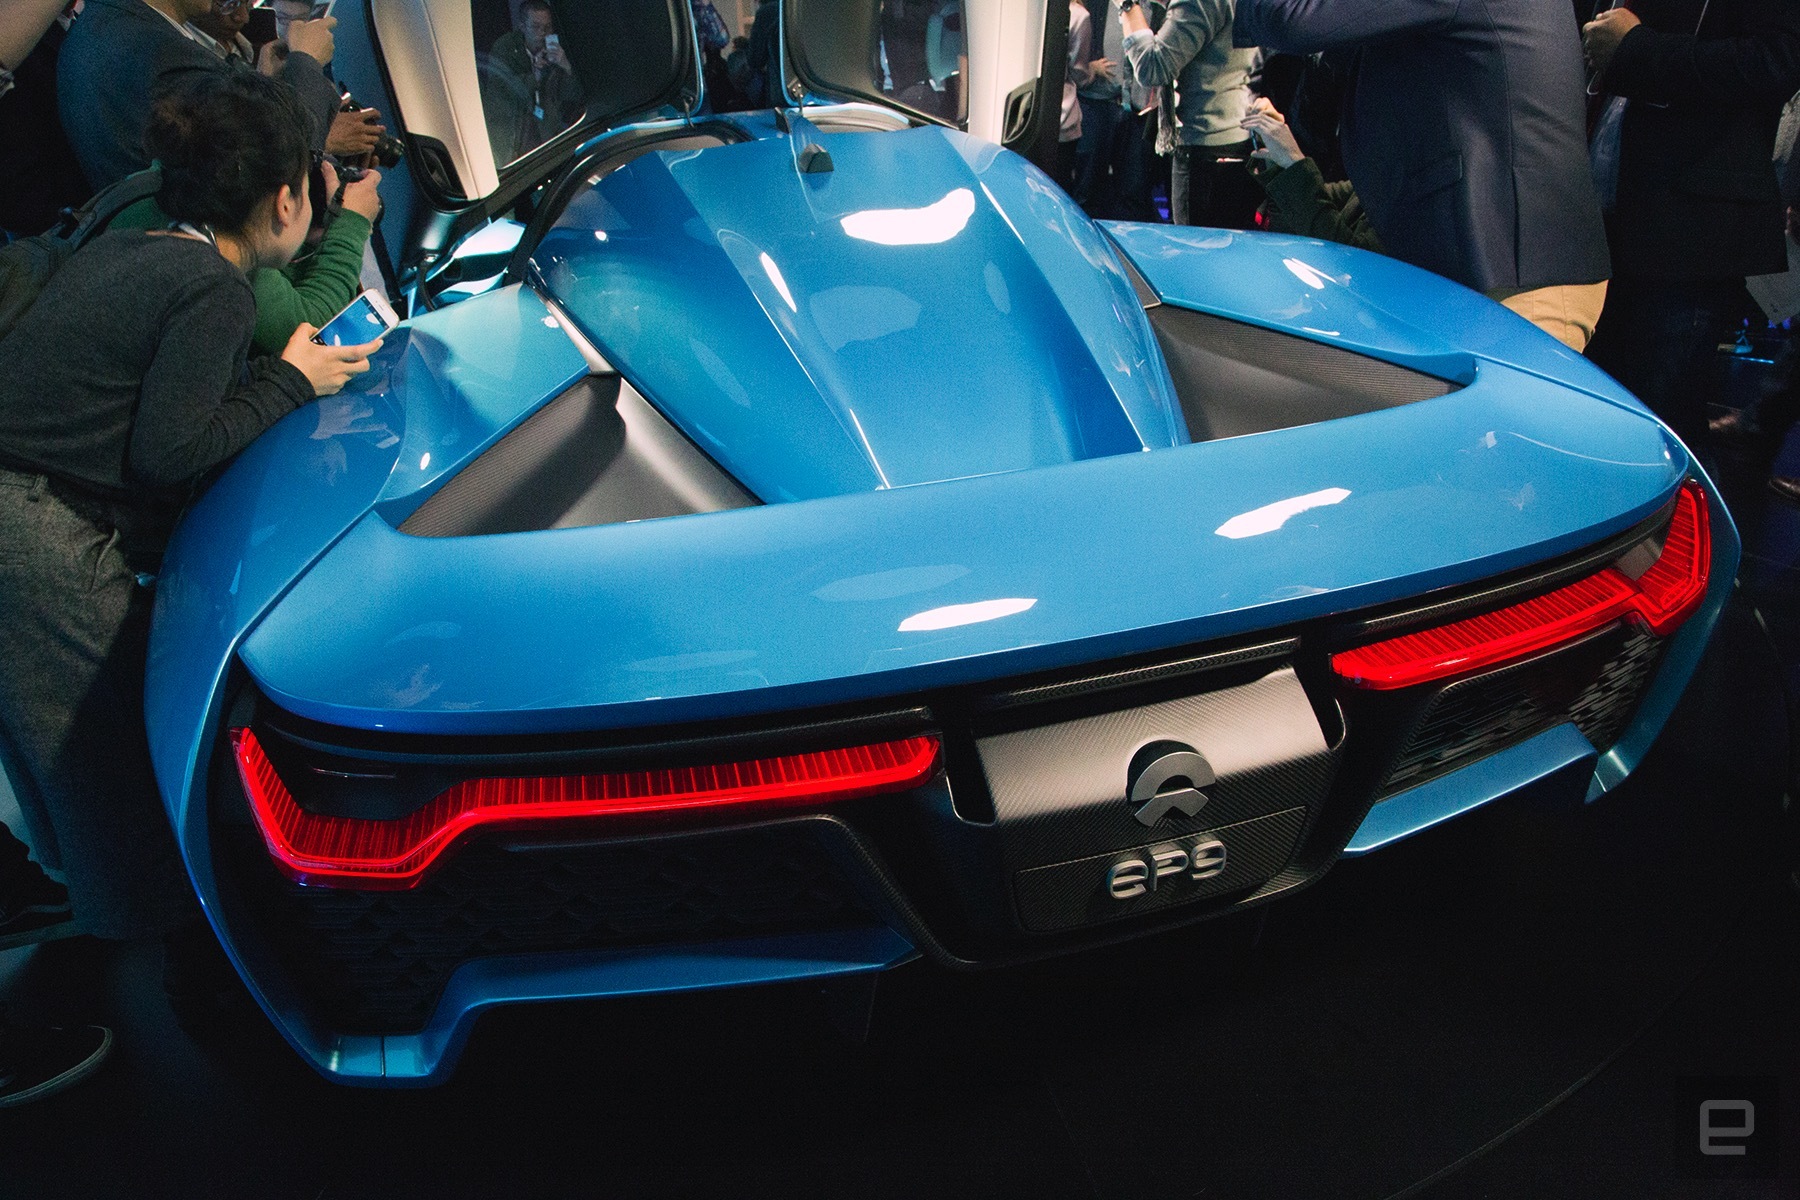 World’s Fastest Electric Car, NIO EP9 at the back end